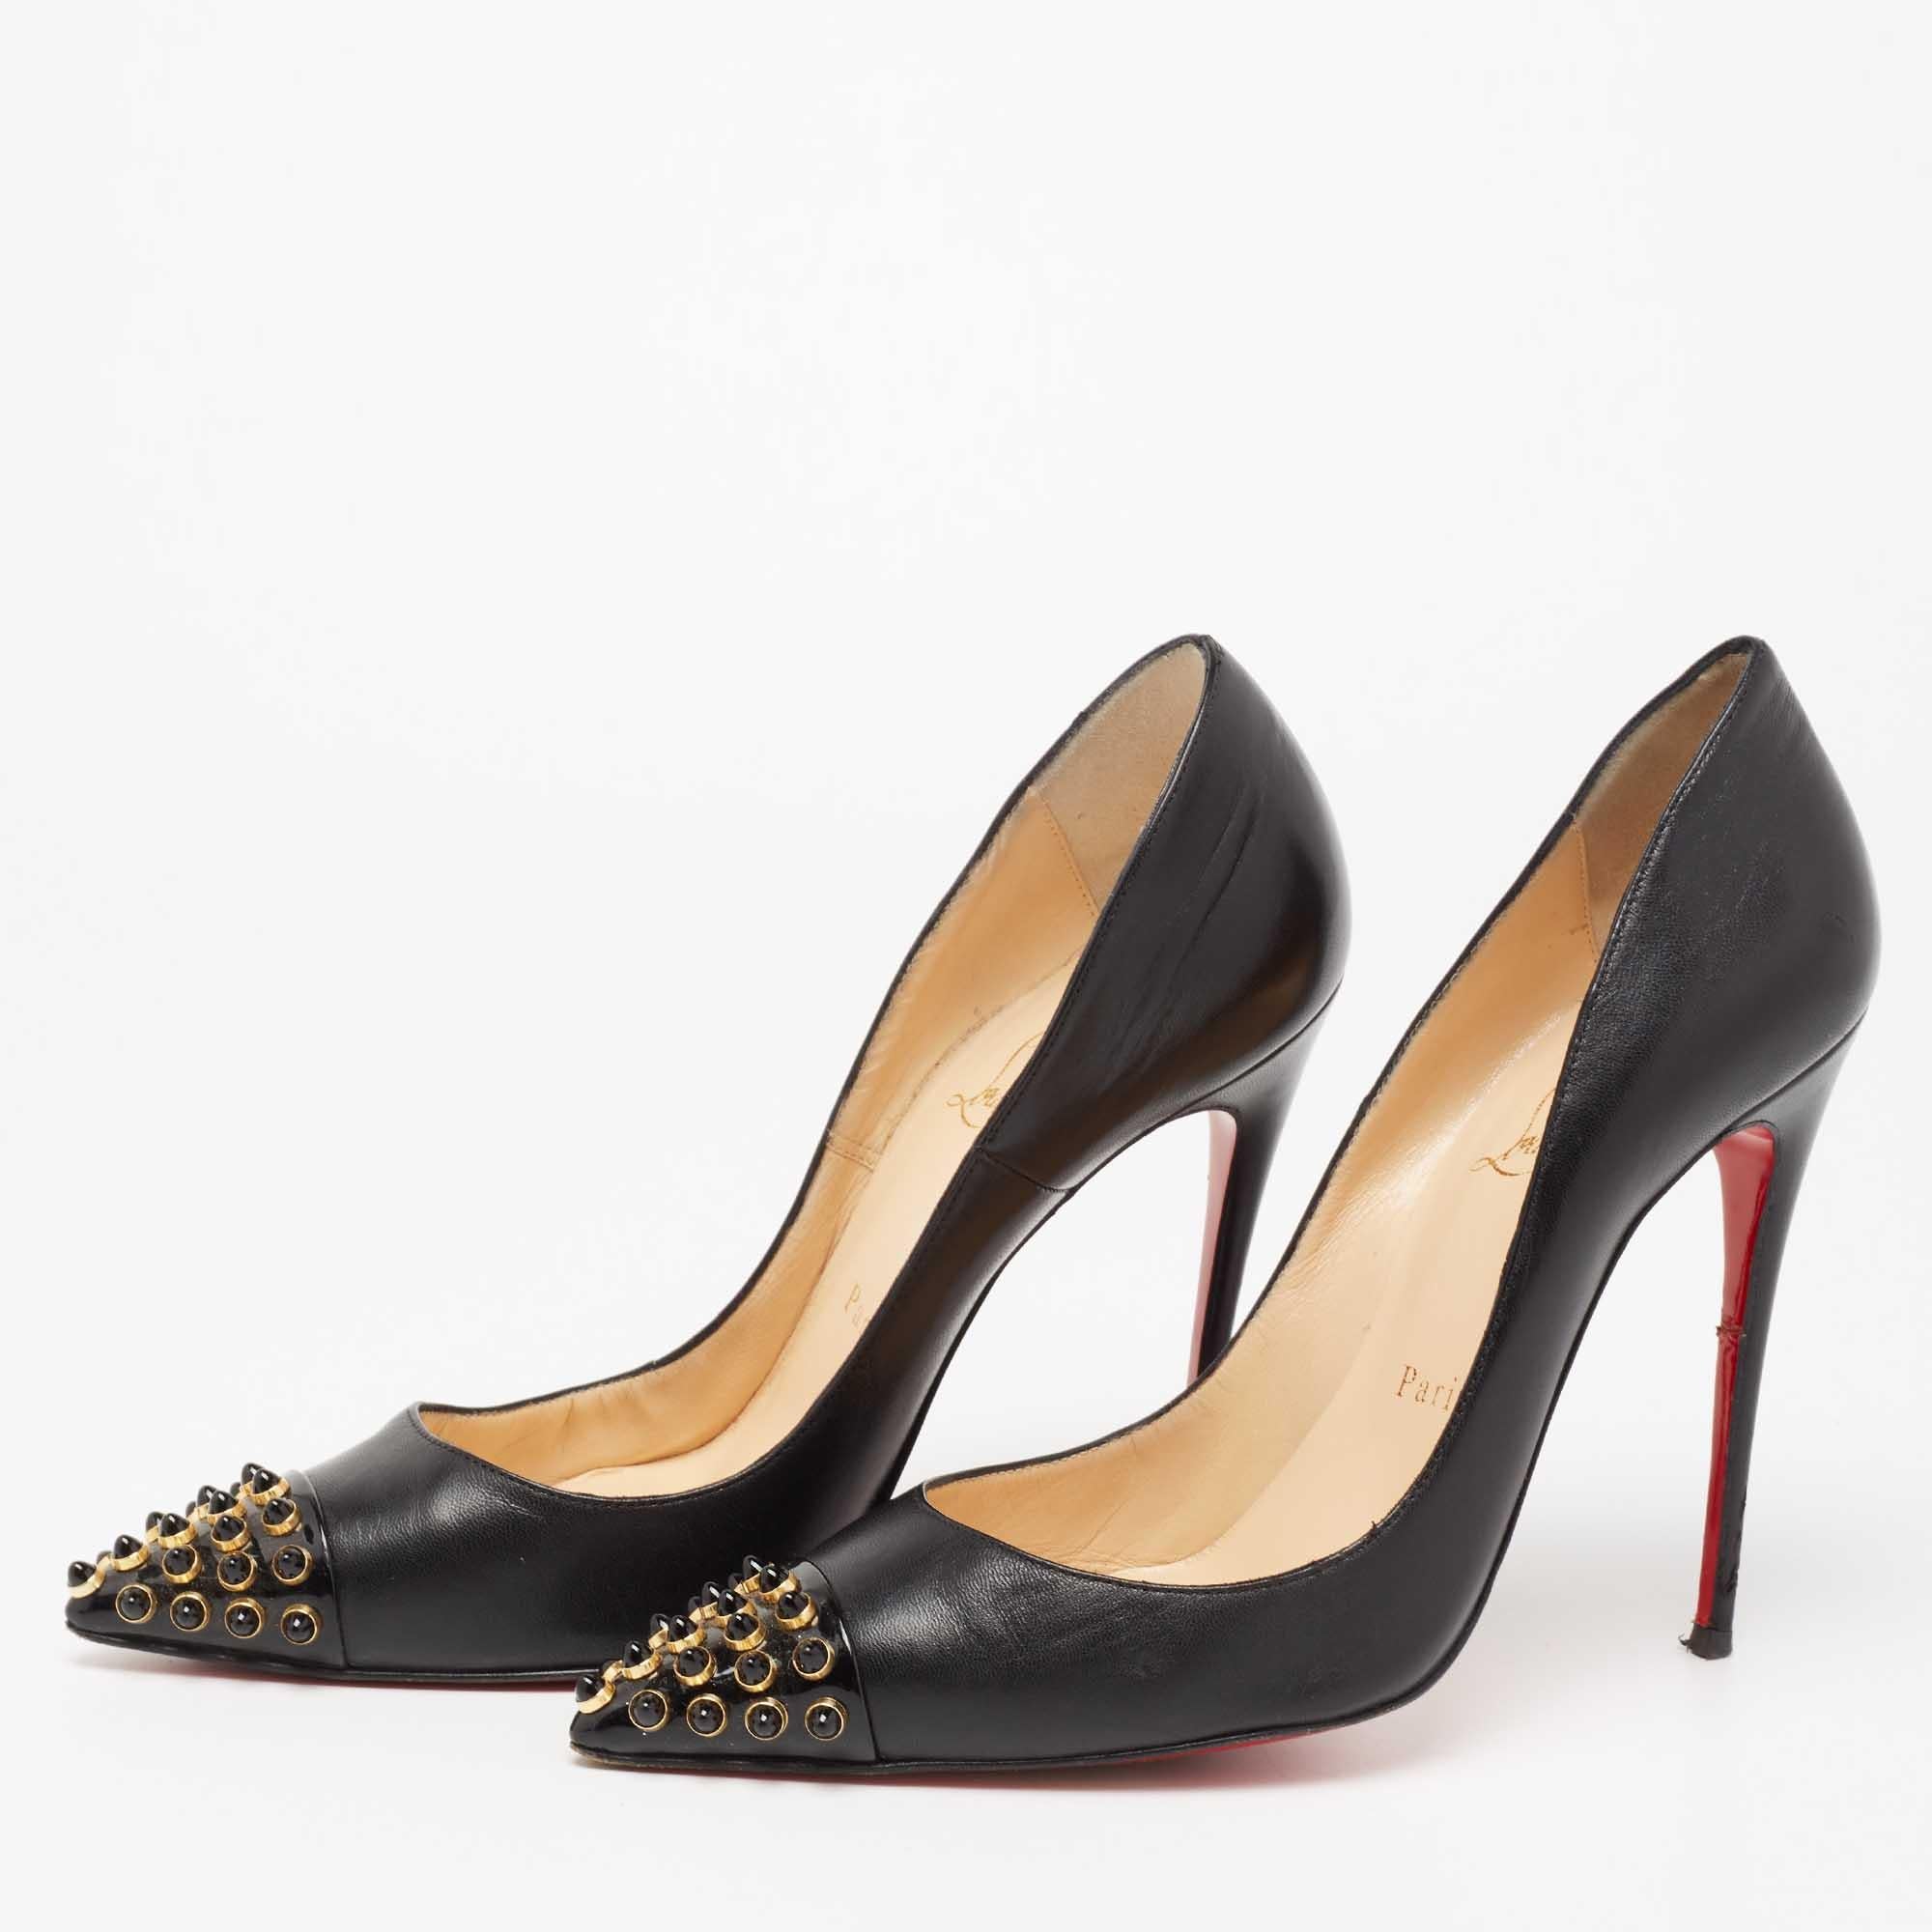 Take every step with elegance and style in these Cabo pumps from the House of Christian Louboutin. They are crafted meticulously using black leather, with embellishments on their pointed toes. They showcase slim heels and a slip-on feature. These